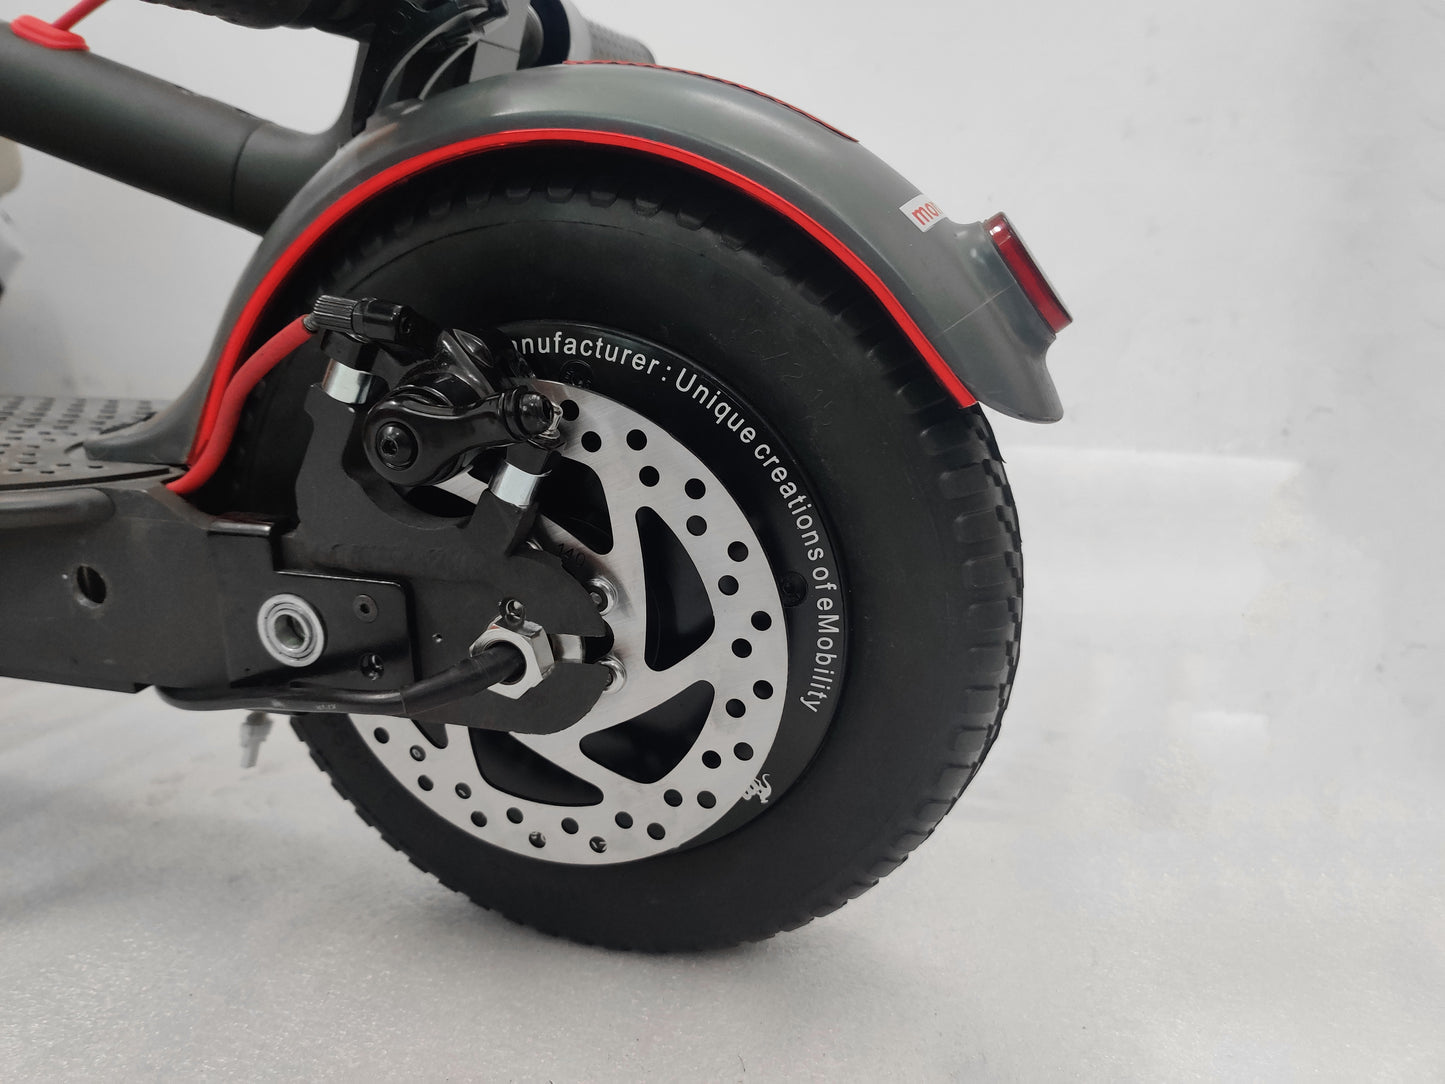 Monorim MD500W-Pro Motor Deck Upgrade Disc Brake Parts For Xiaomi Scooter pro2/pro1, 140mm for Rear Motor